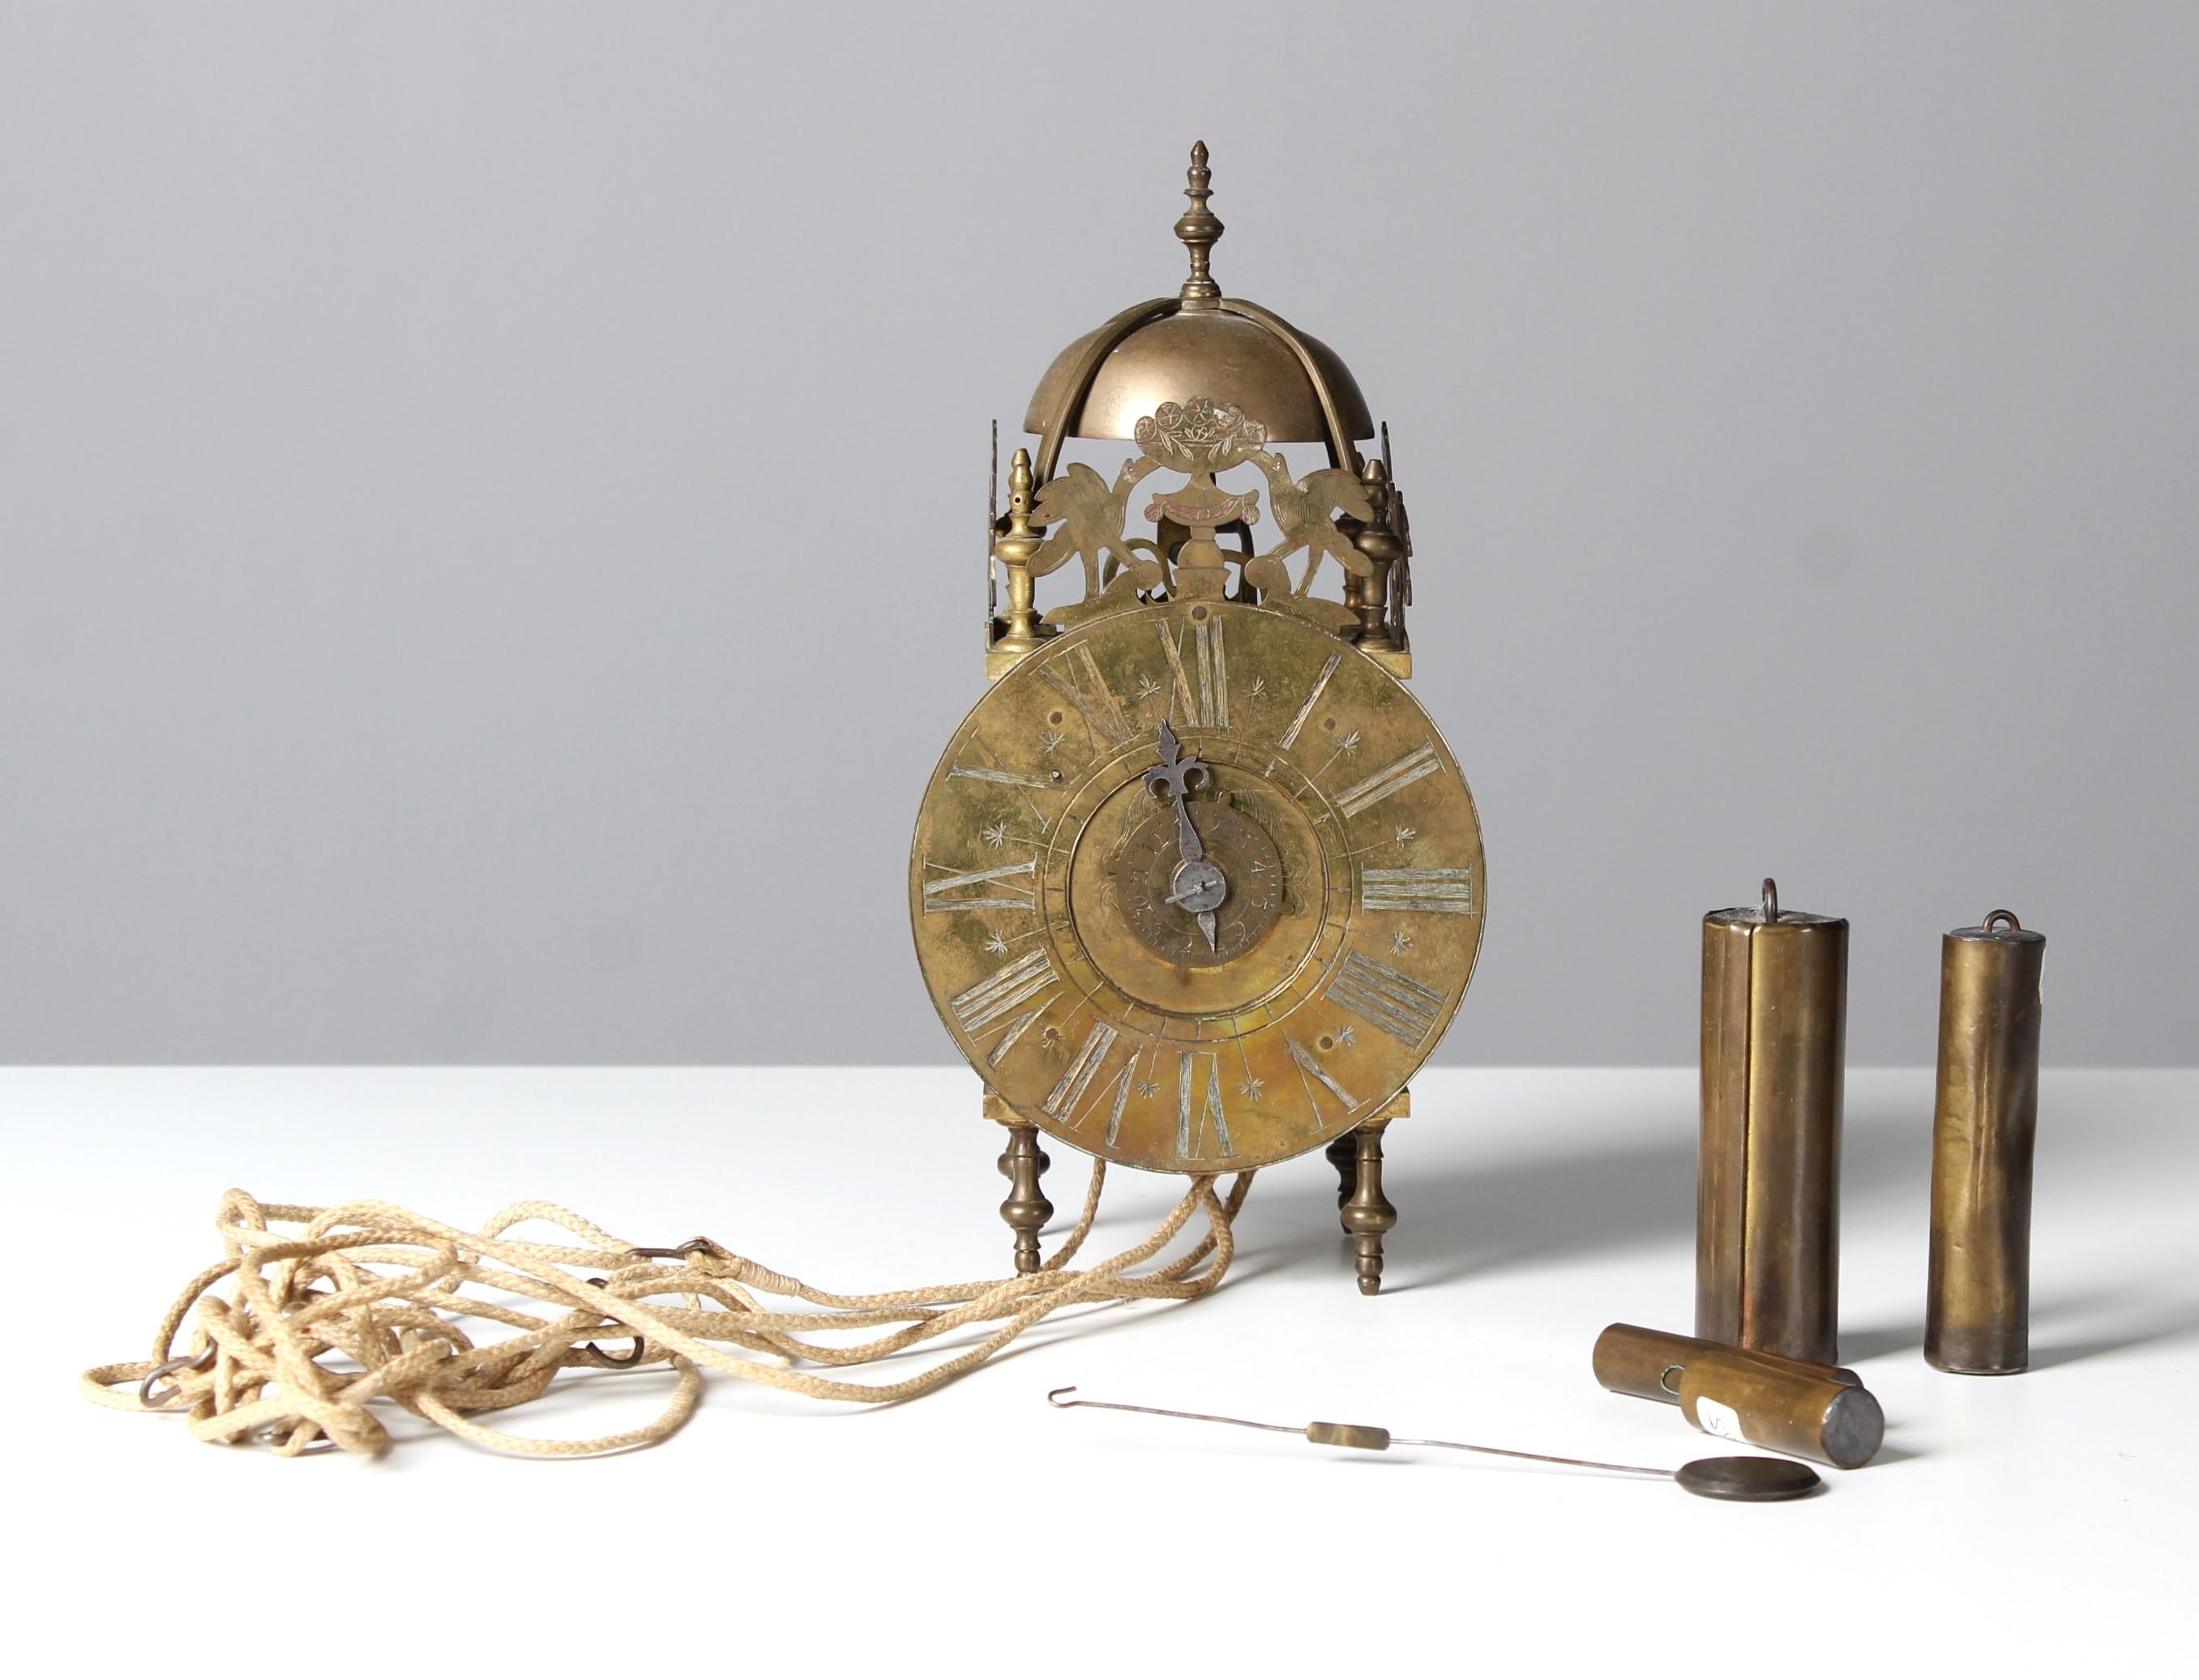 Unrestored French lantern clock with alarm clock from the early 18th century.
Pendulum and weights are present.

This clock needs restoration!

H x W x D: approx. 25 x 13 x 10 cm 

You can find similar clocks in the TARDY 1ere Partie Des origines au